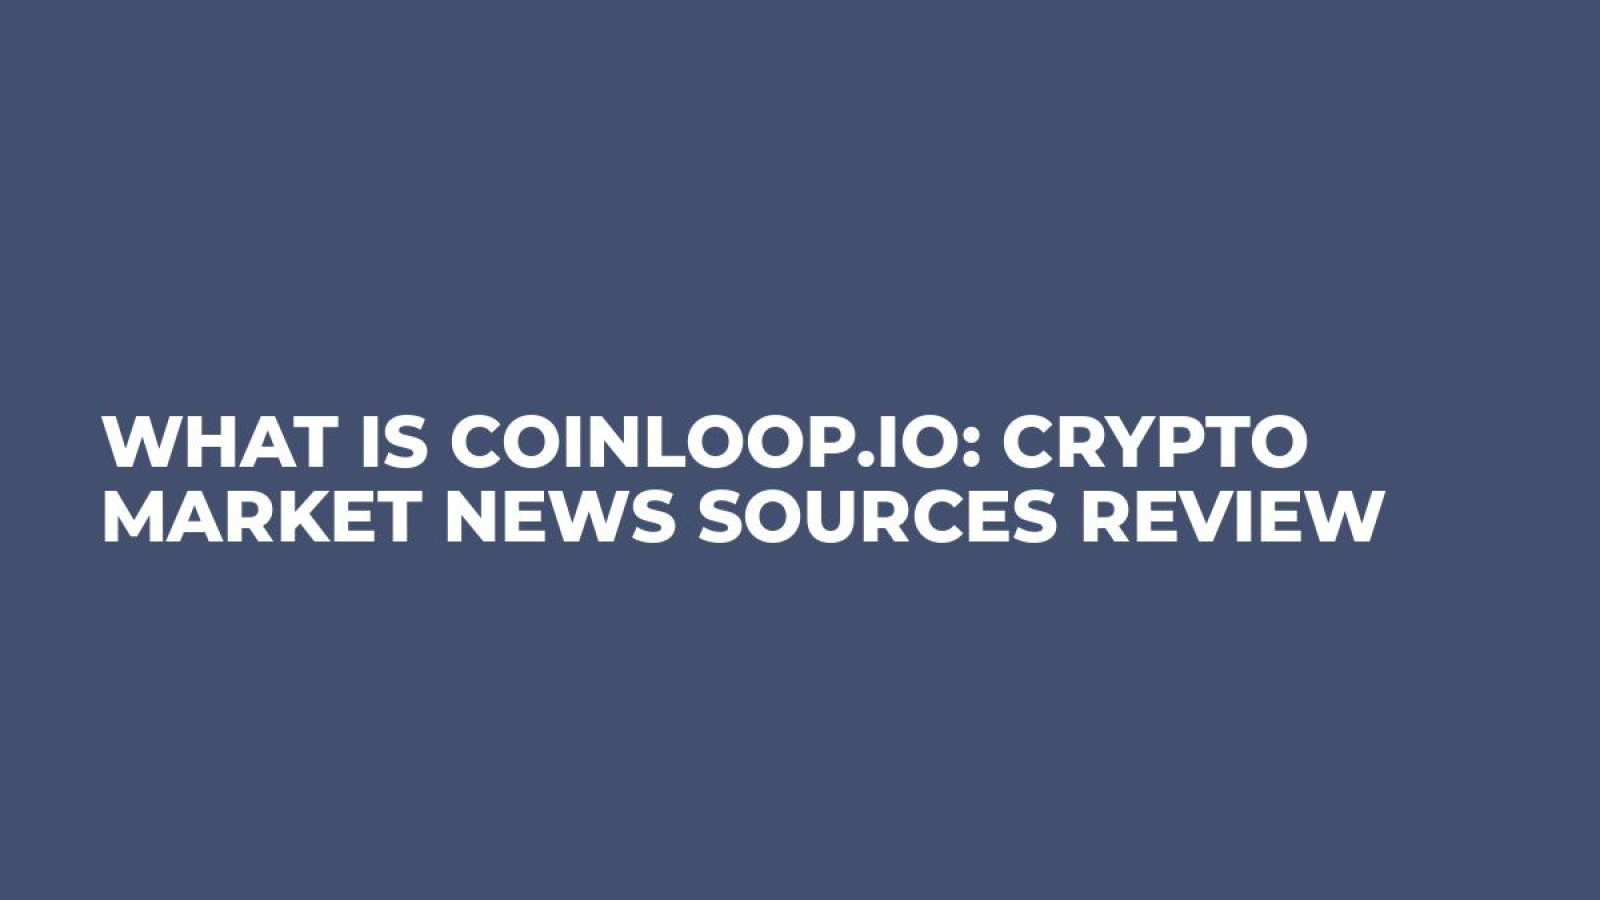 What is Coinloop.io: Crypto Market News Sources Review